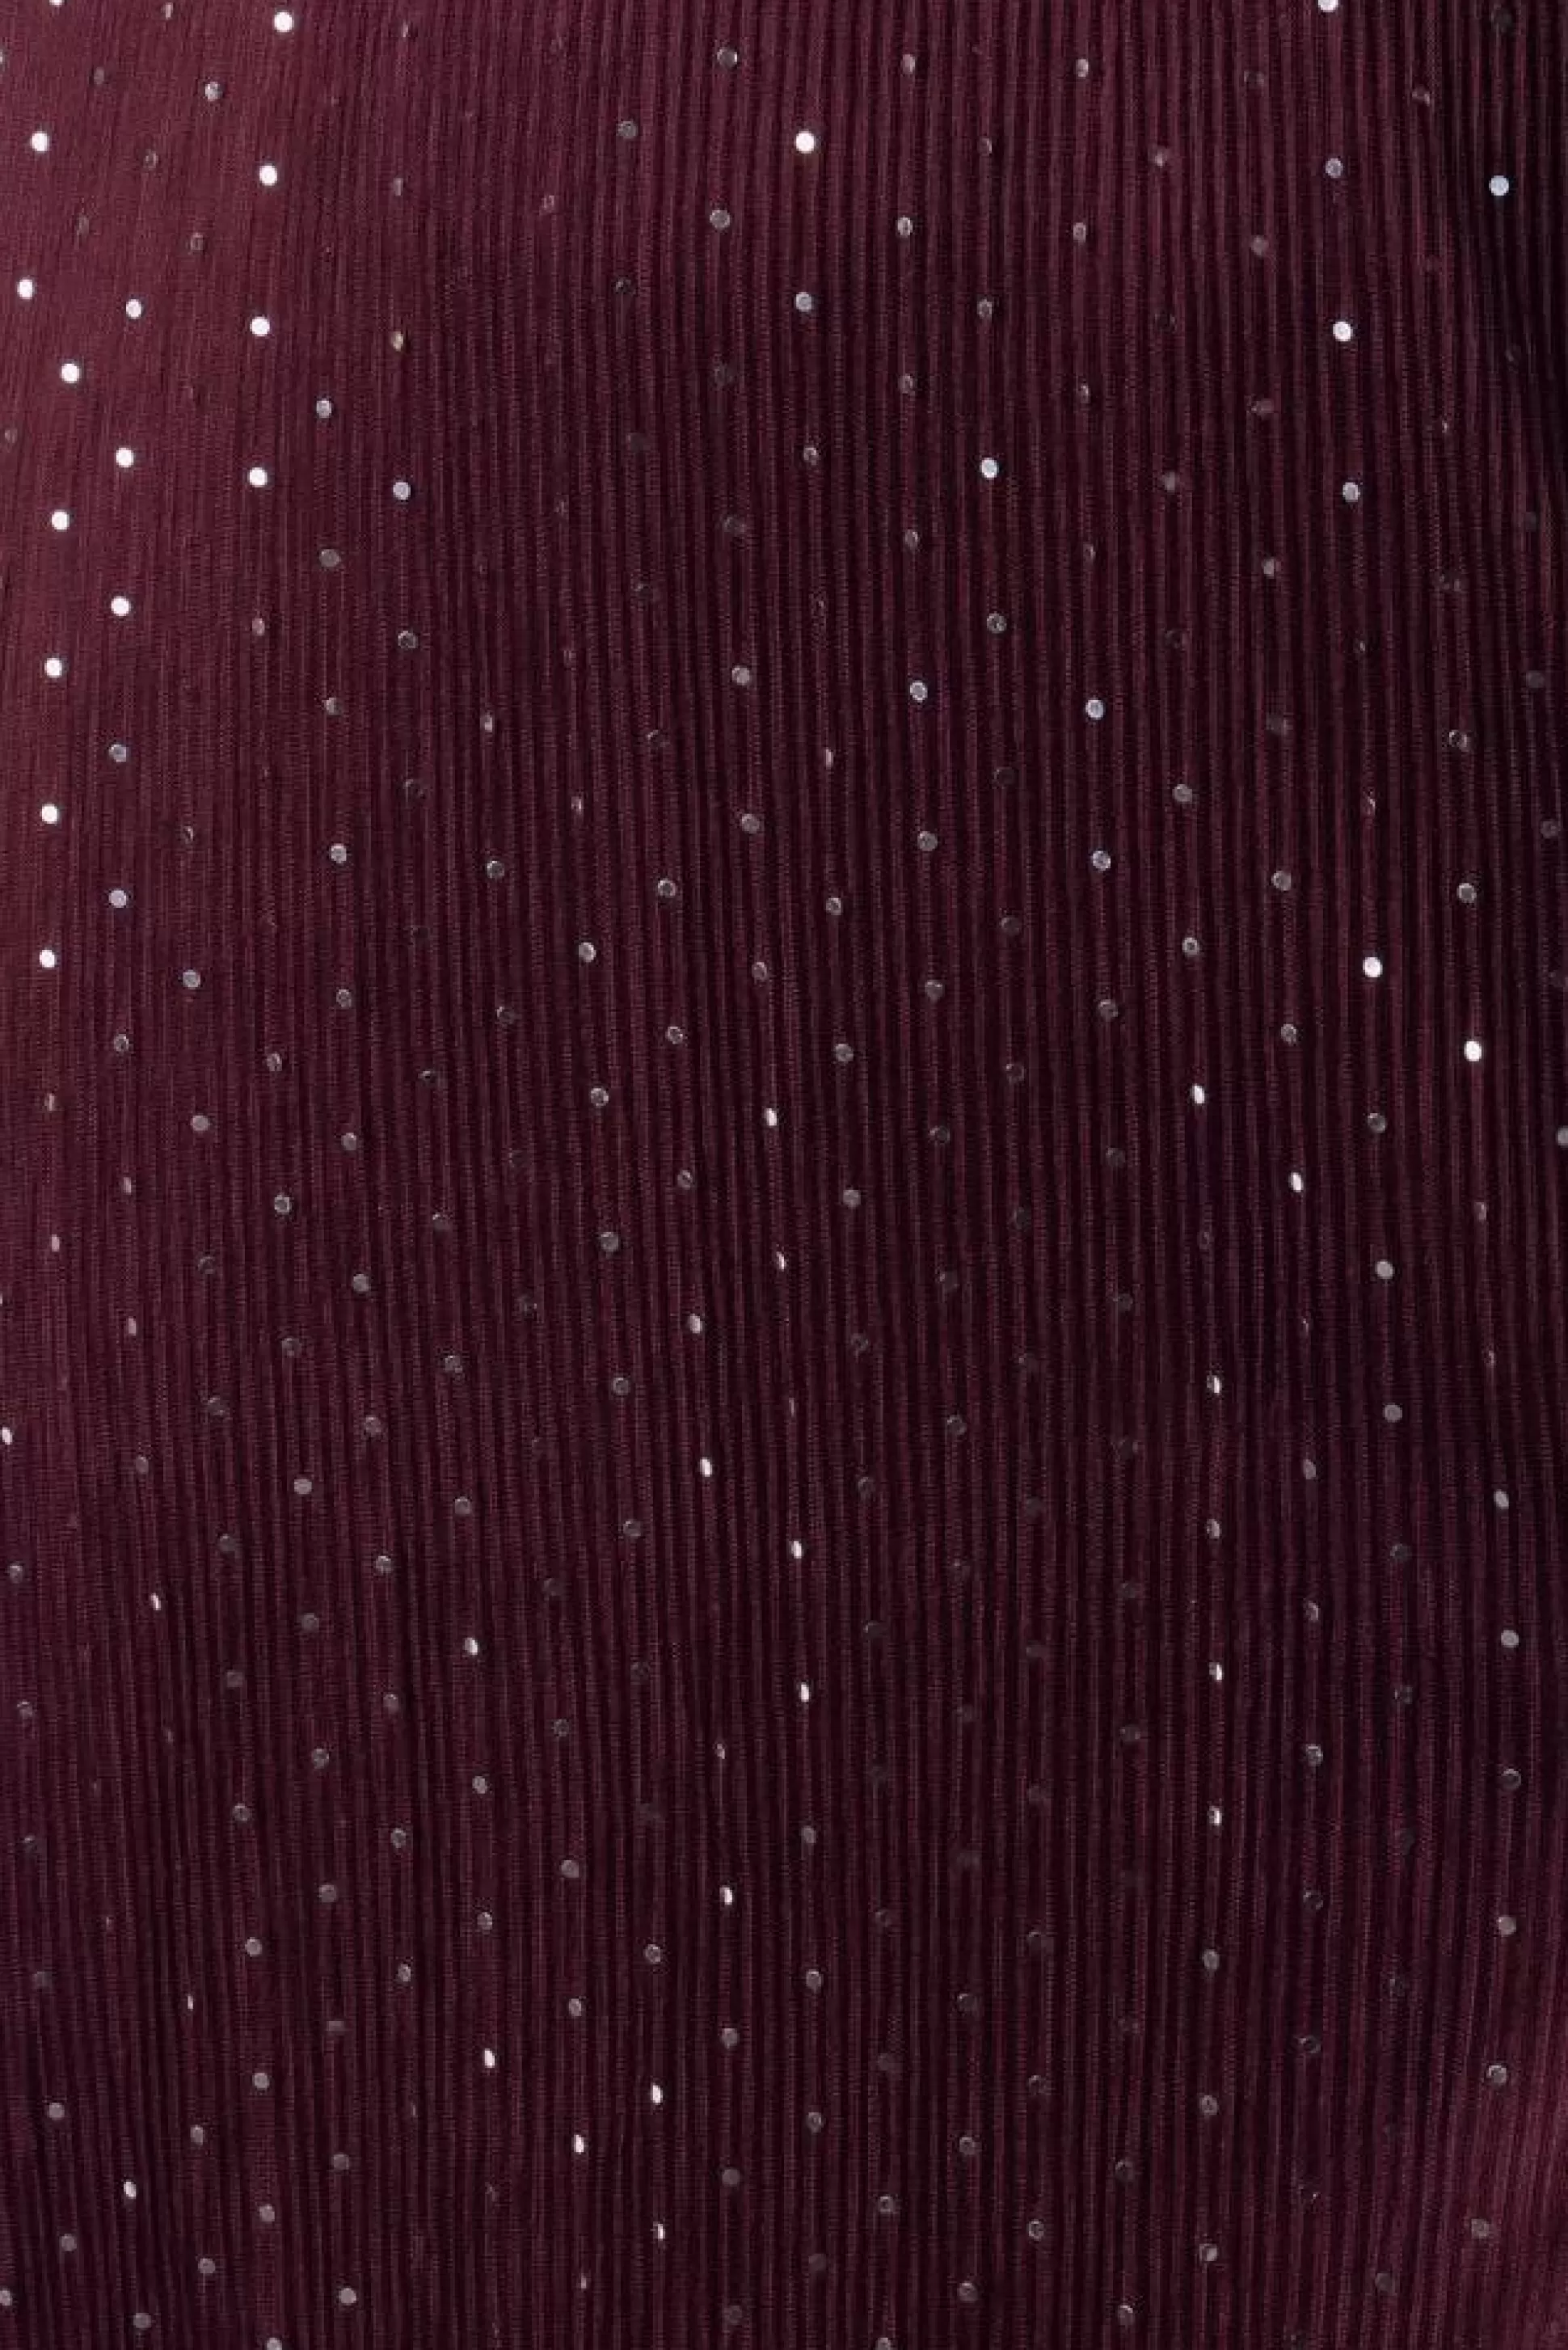 fabric swatches | Baltic Born Fabric Swatch - Abigail Sparkle | Mulberry